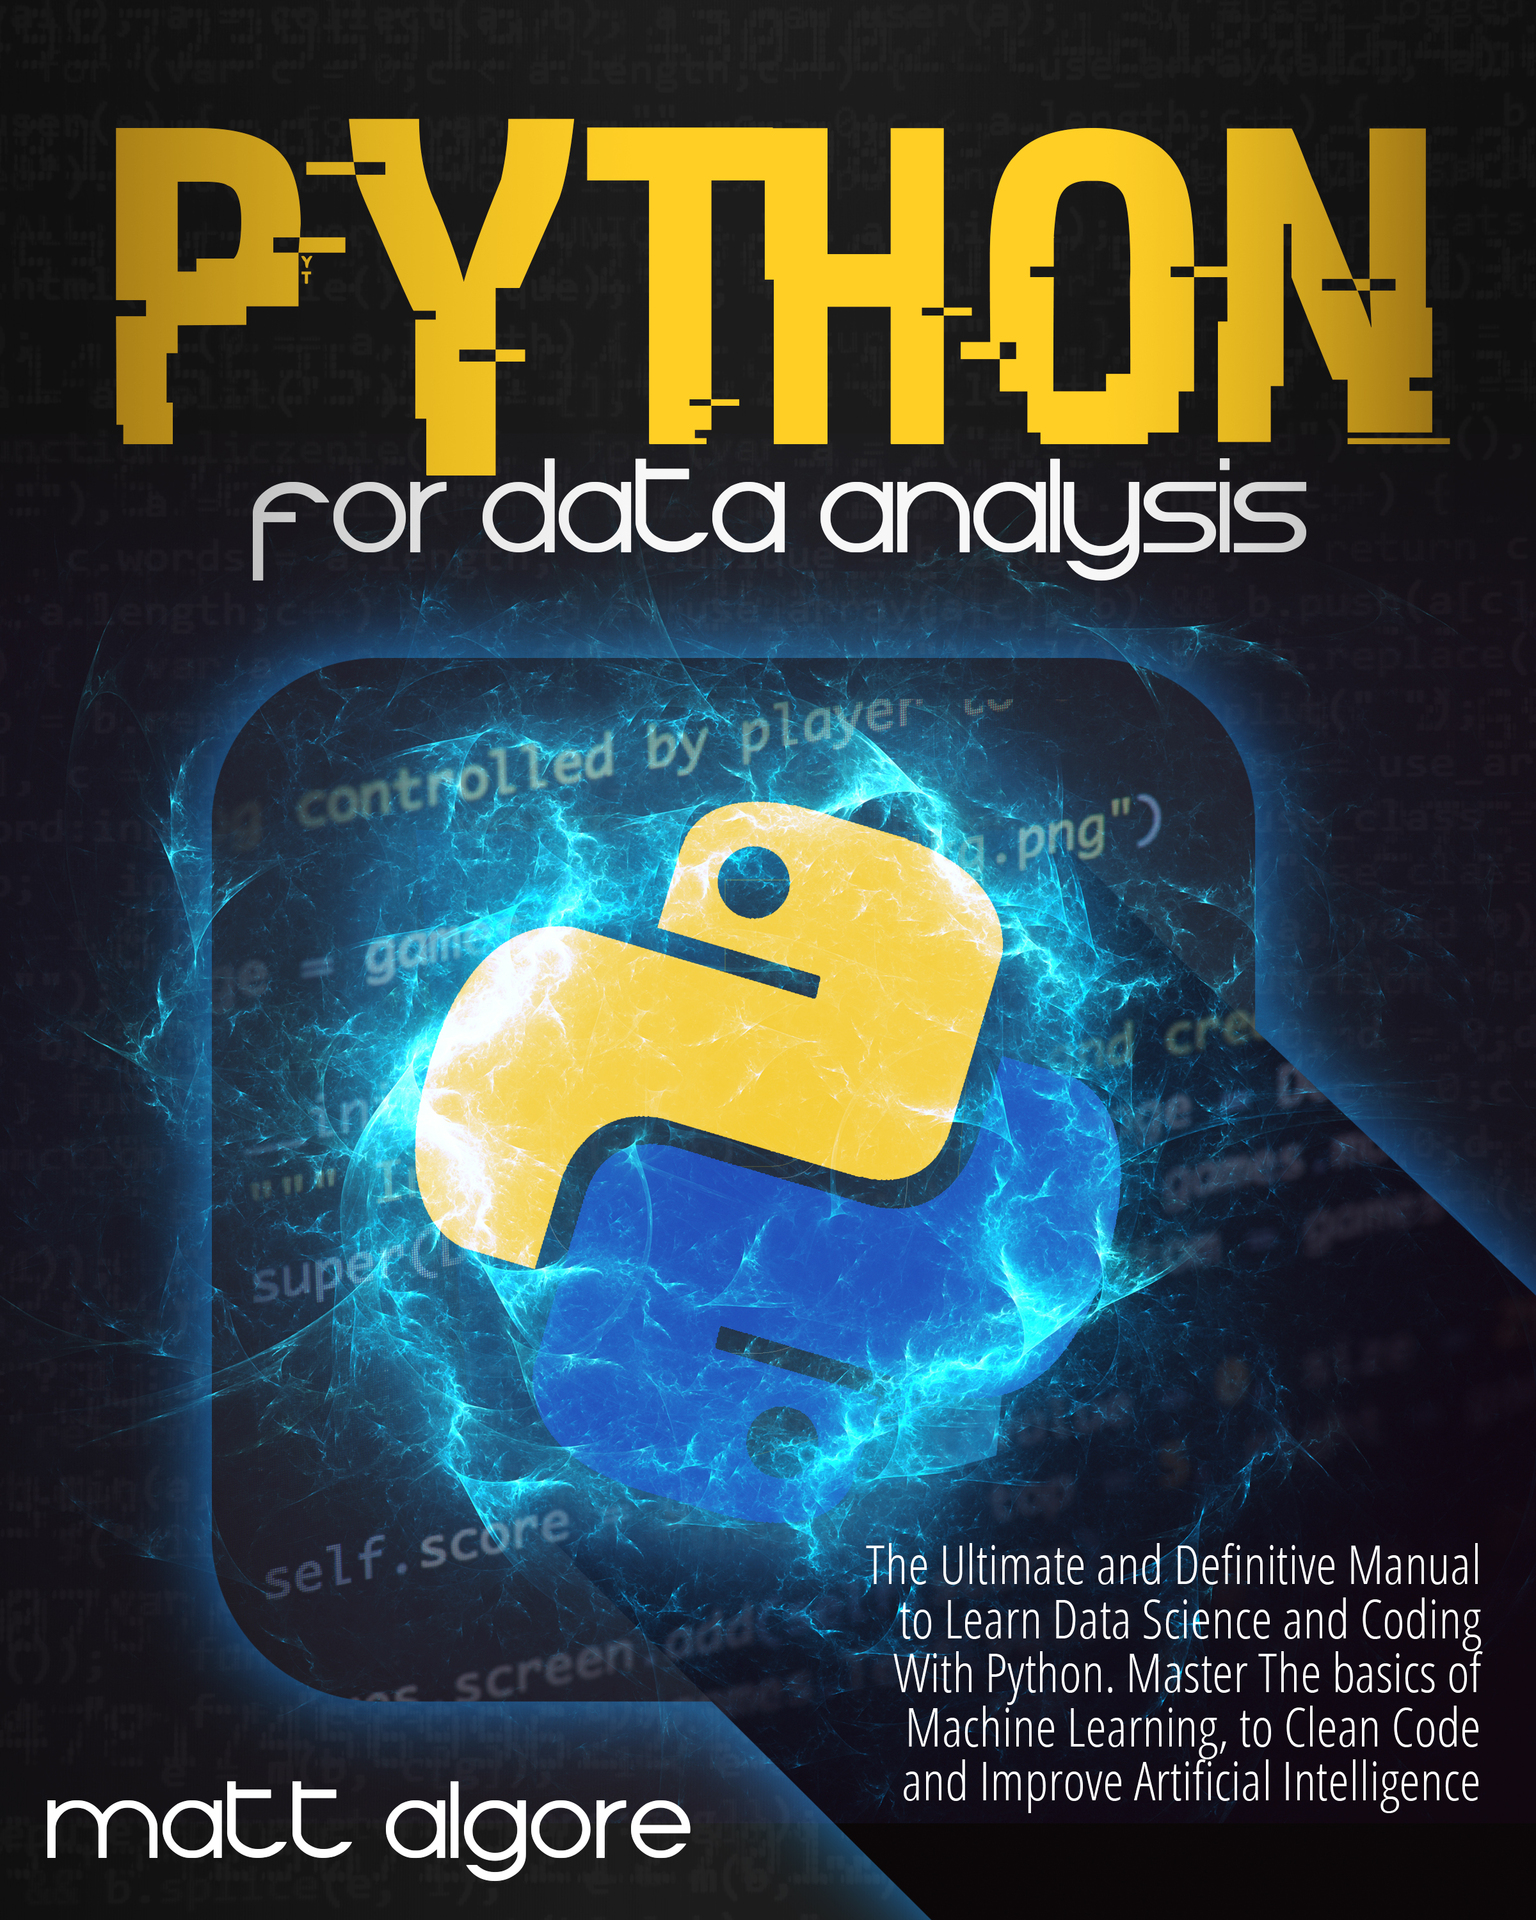 Python For Data Analysis: The Ultimate and Definitive Manual to Learn Data Science and Coding with Python. Master The basics of Machine Learning, to Clean Code and Improve Artificial Intelligence